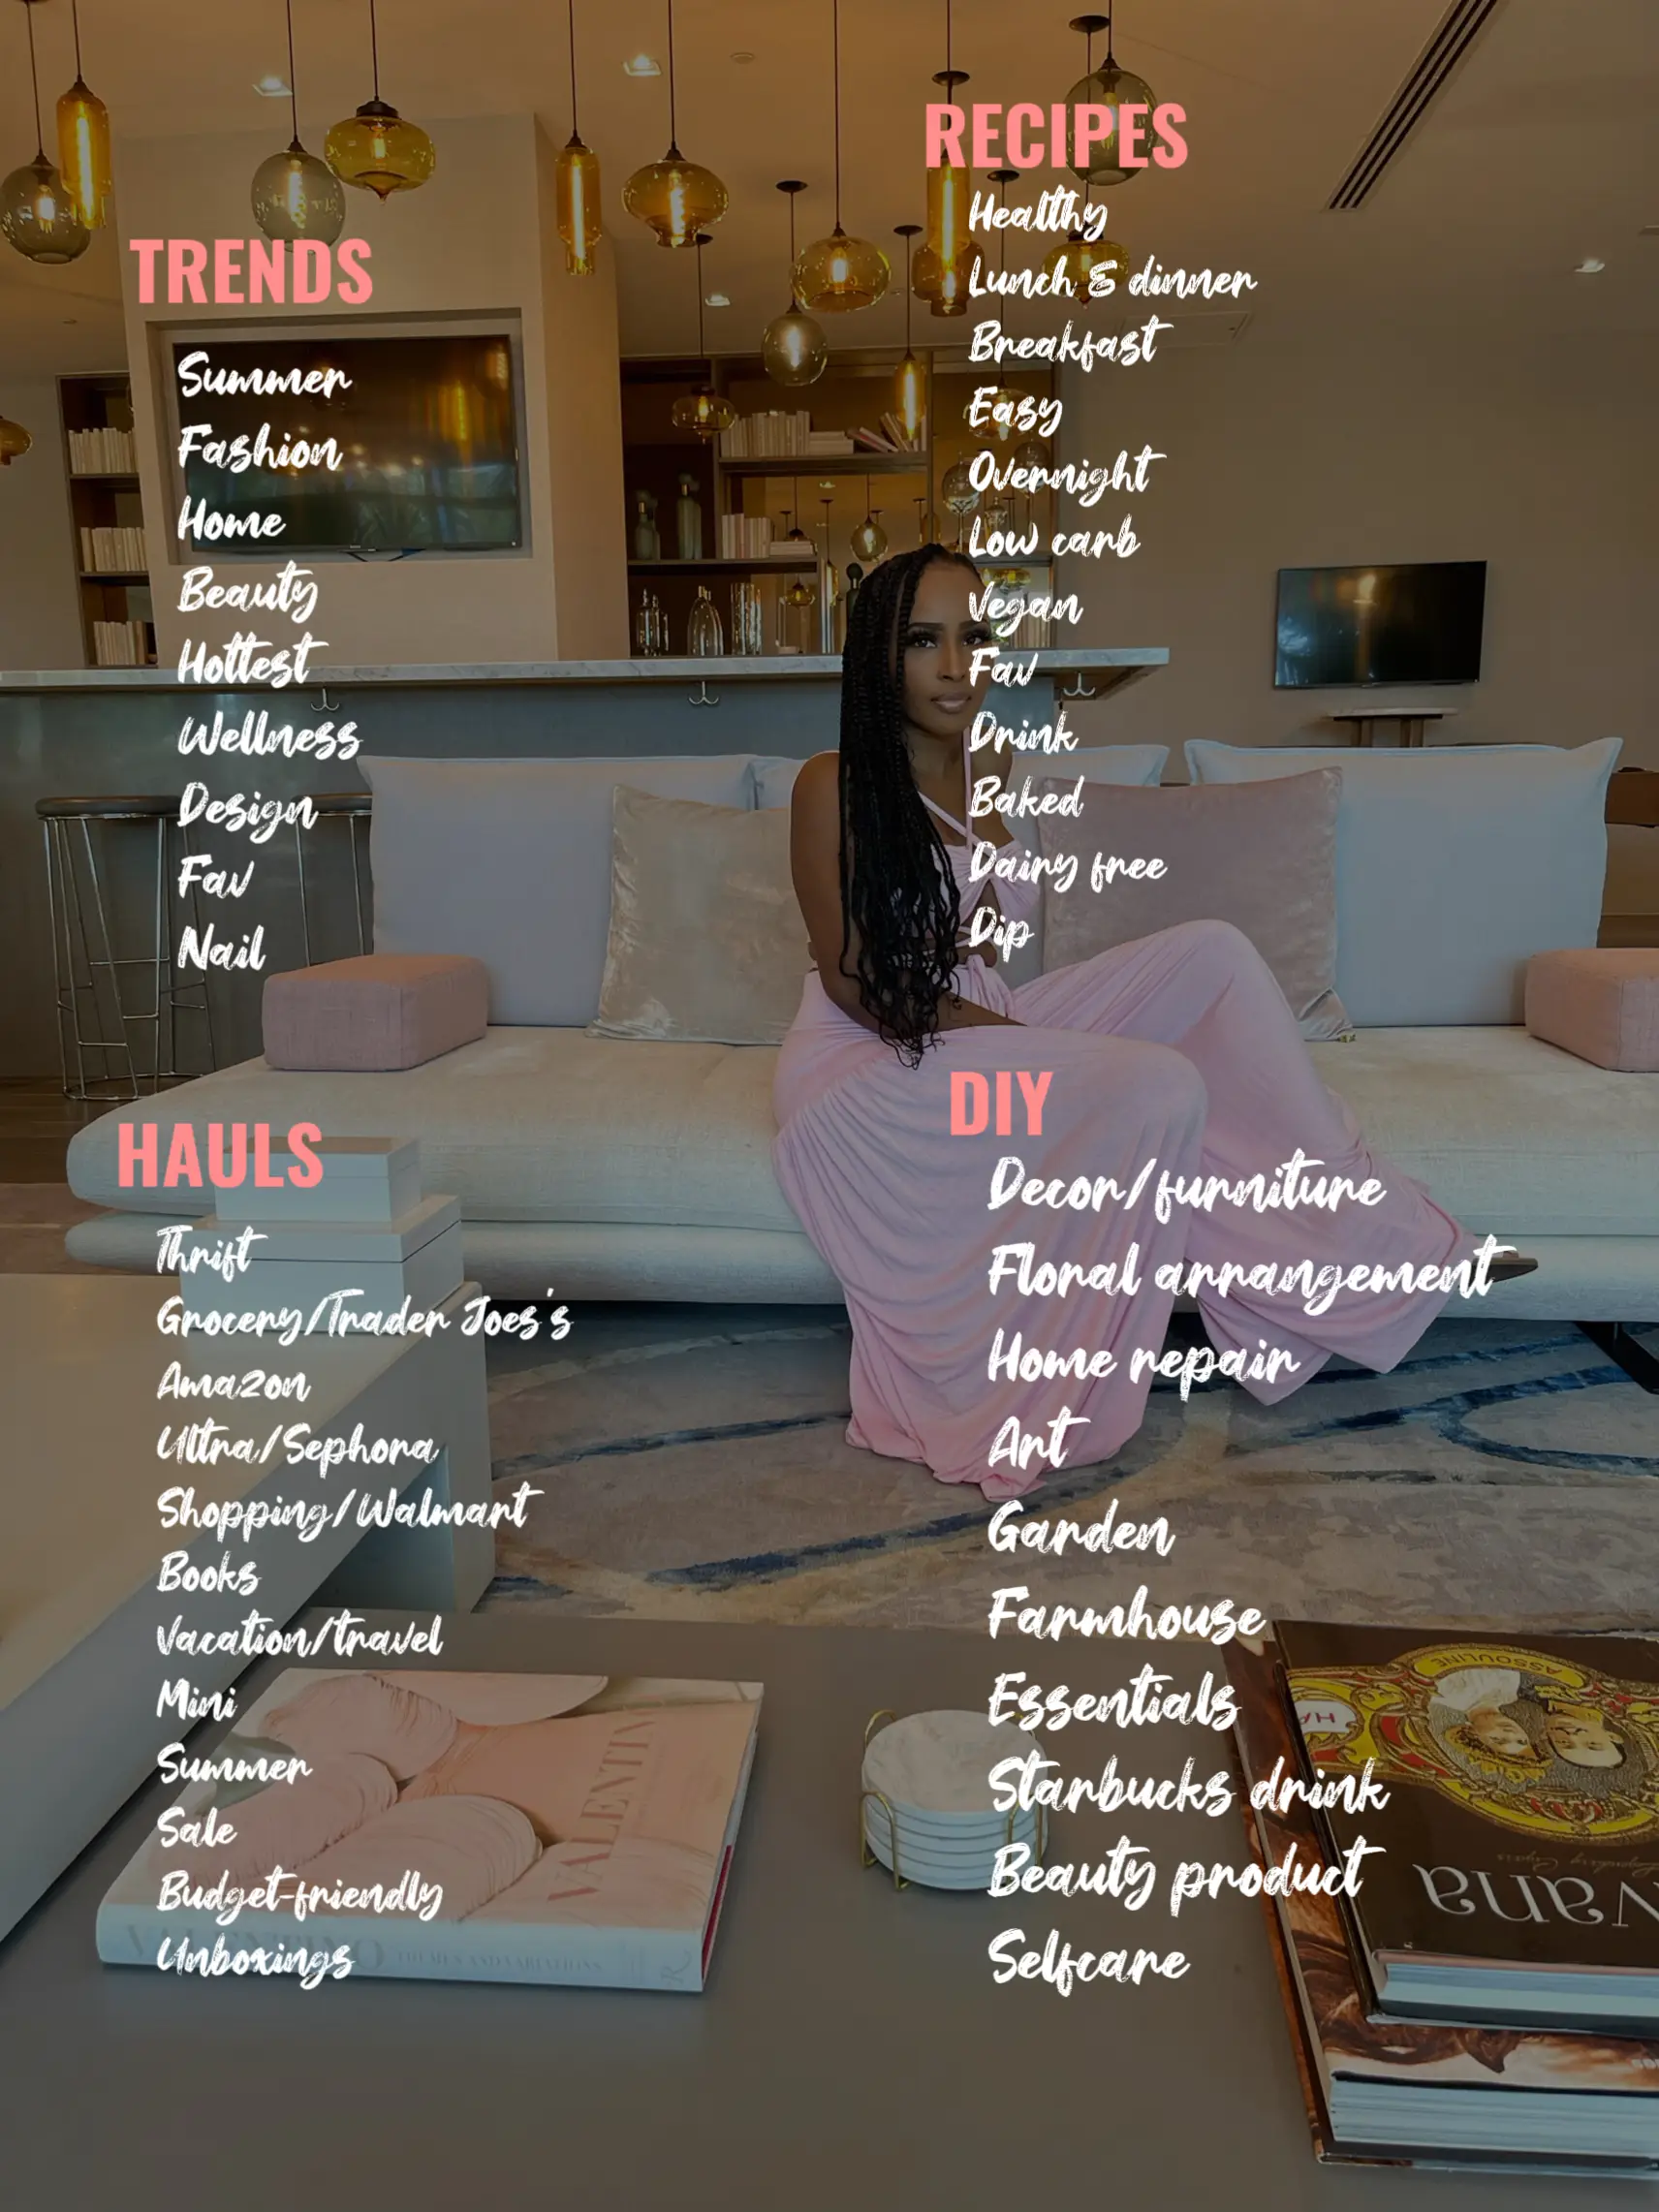  A woman is sitting on a couch with a table in front of her. The table has a list of items on it, including a book titled "DIY HAULS".